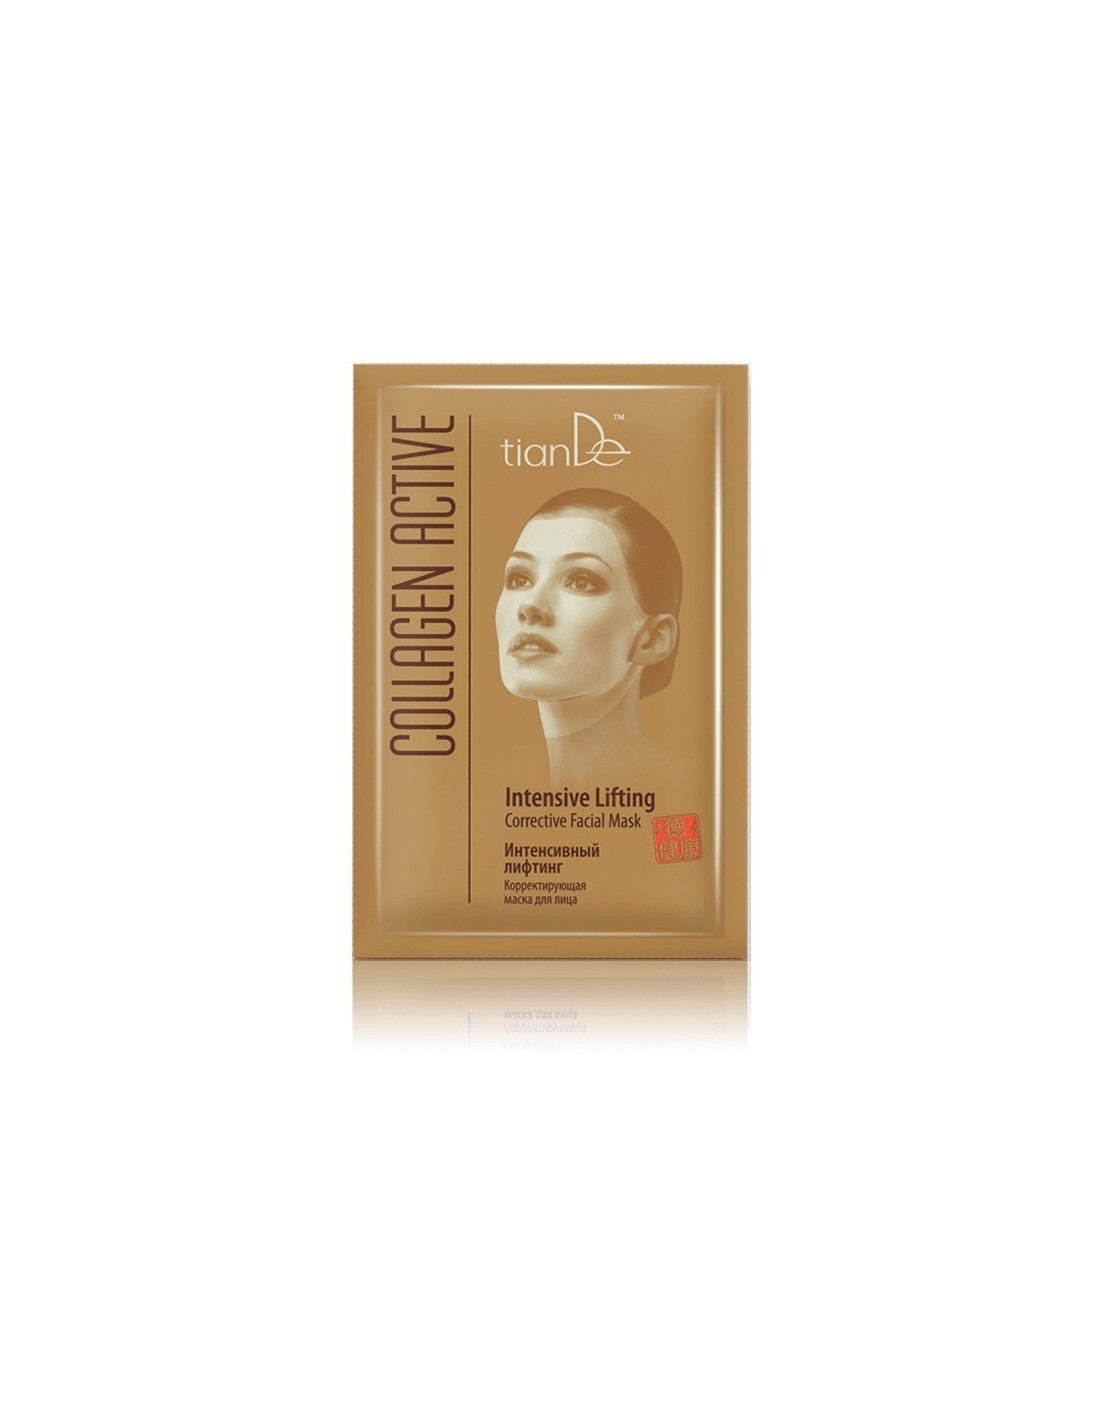 Collagen Intensive Lifting Corrective Face Mask ◼2.4 POINTS